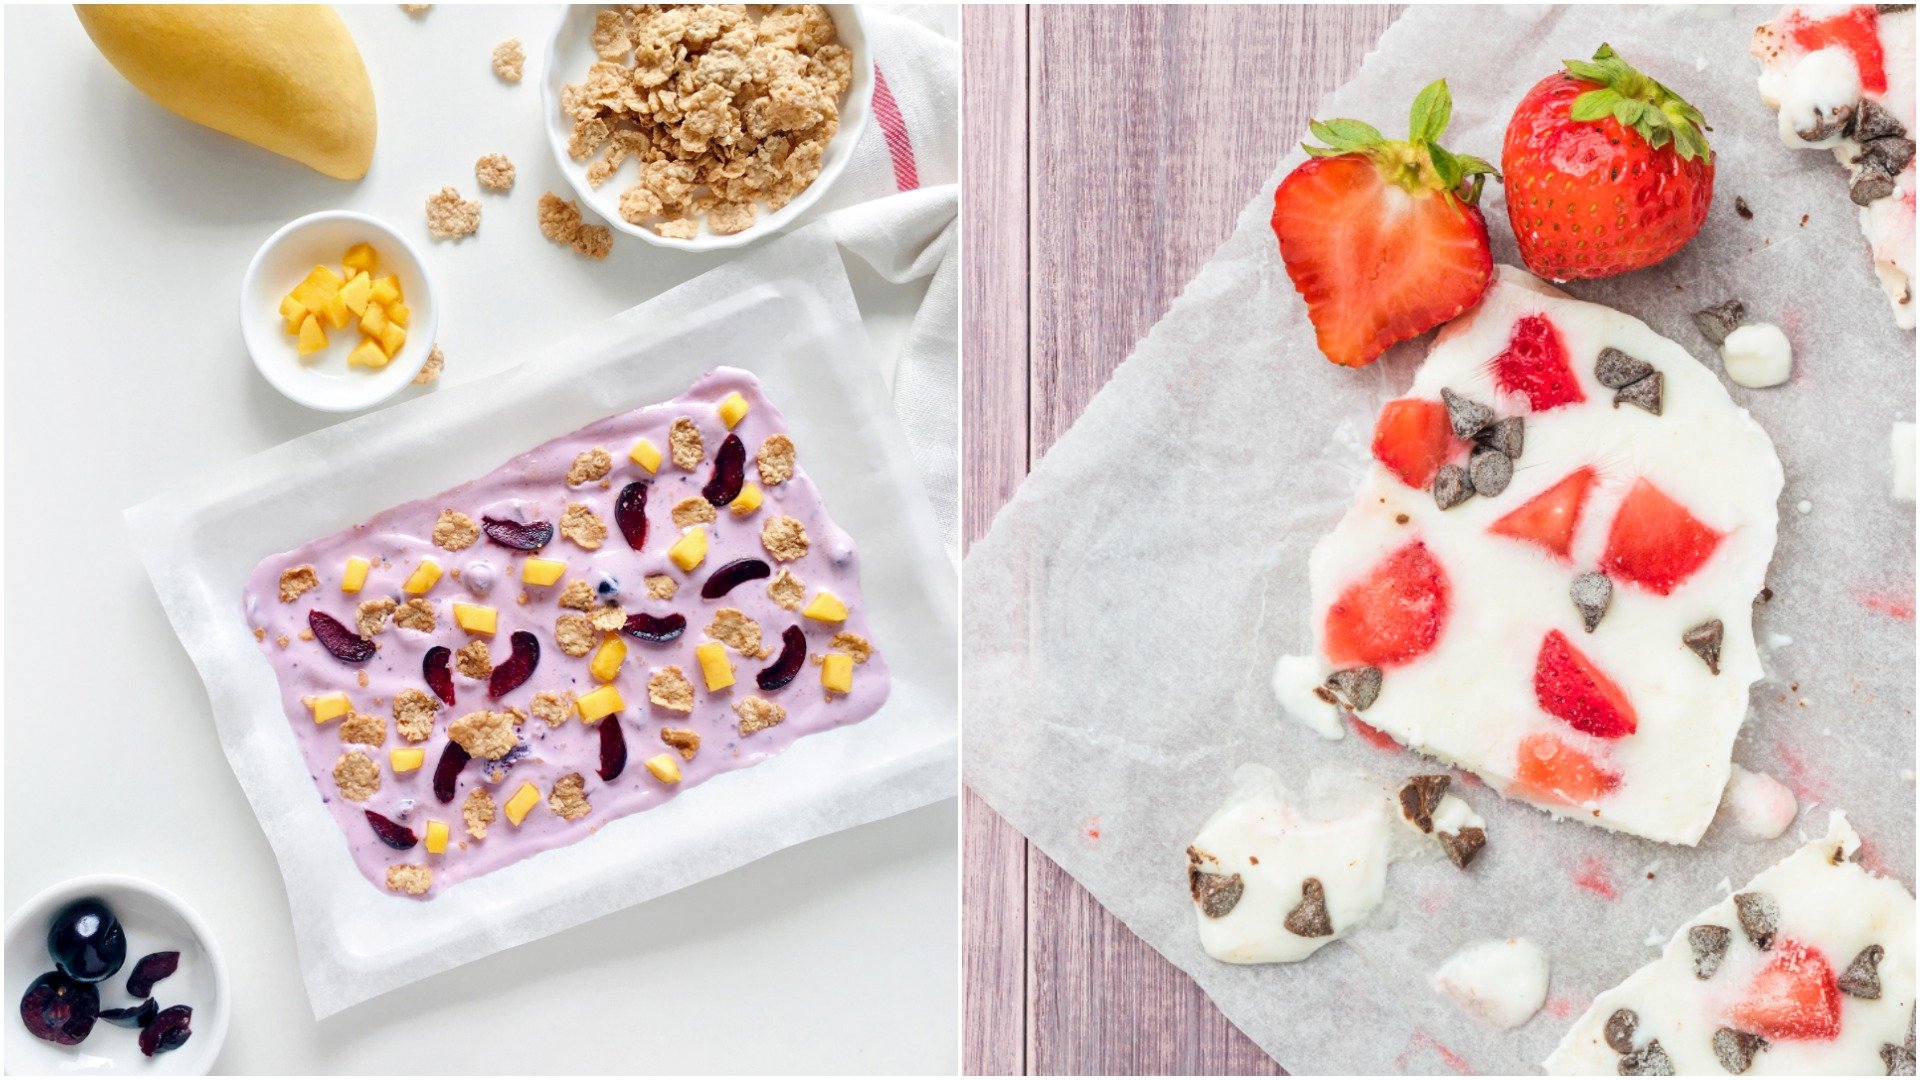 Try adding some crushed nuts, chocolate chips or other fruits to your yogurt bark for extra color and flavor. (iStock Photos)